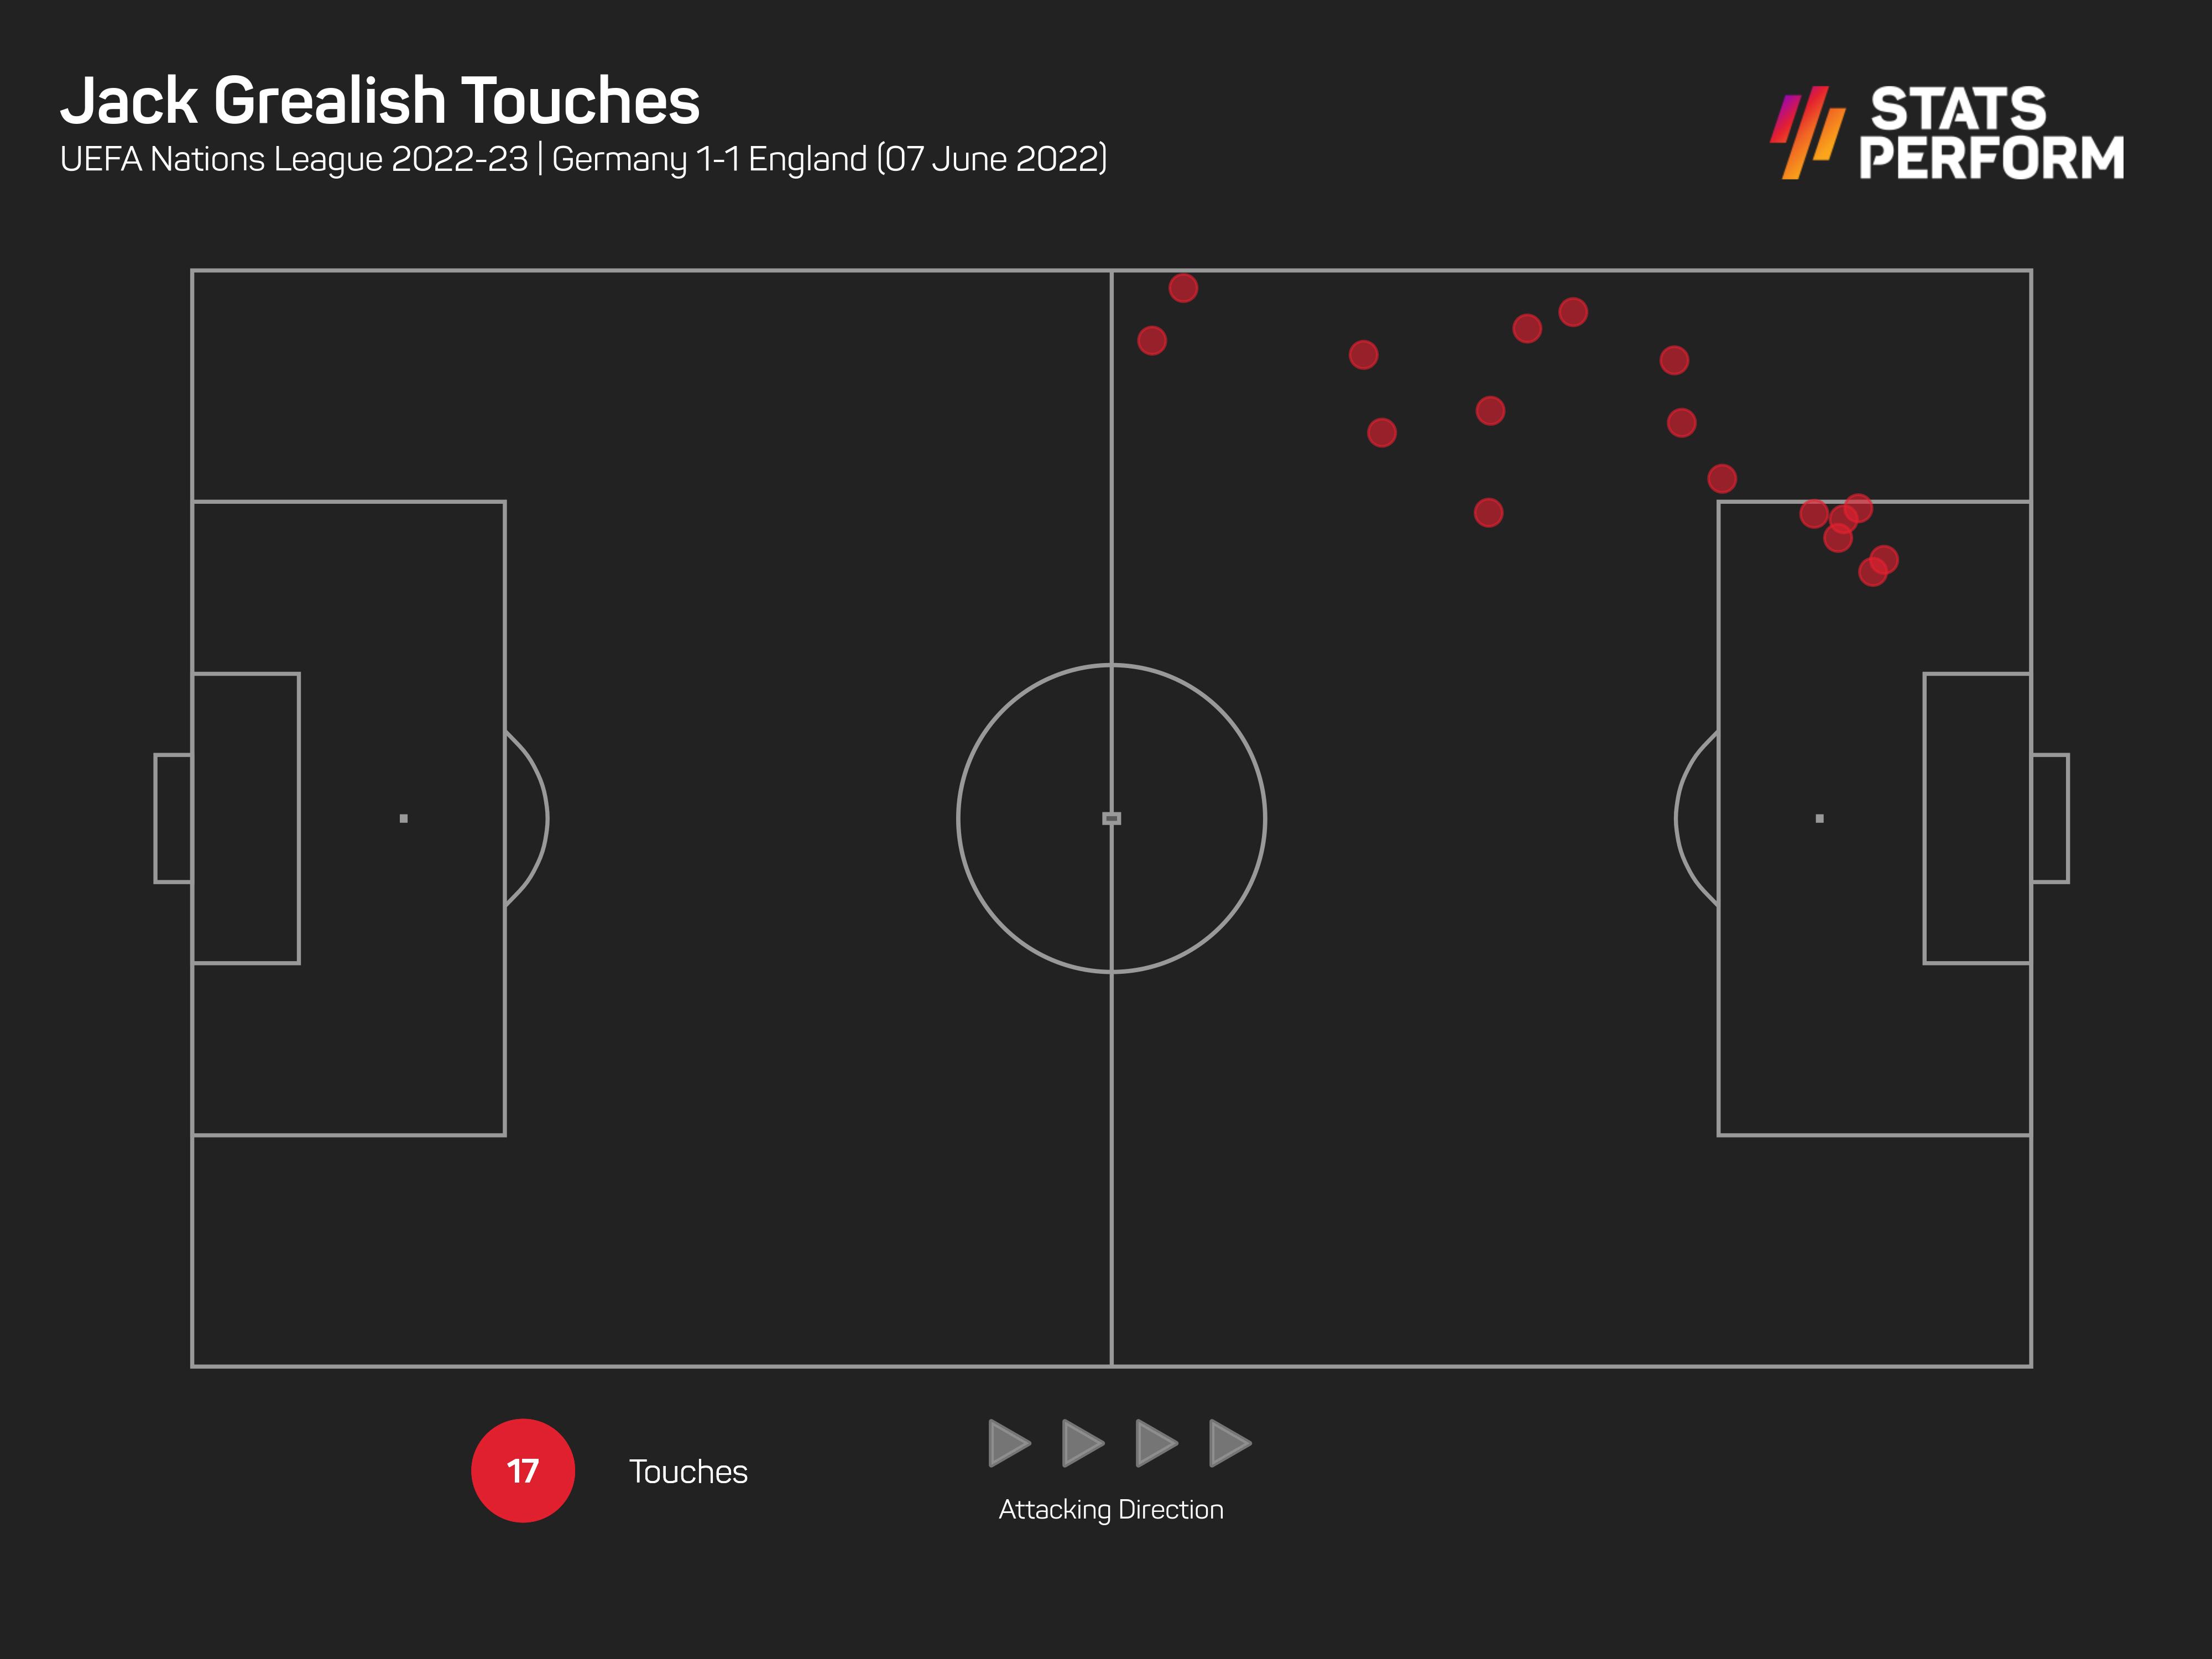 Jack Grealish had six touches in the opposition box against Germany